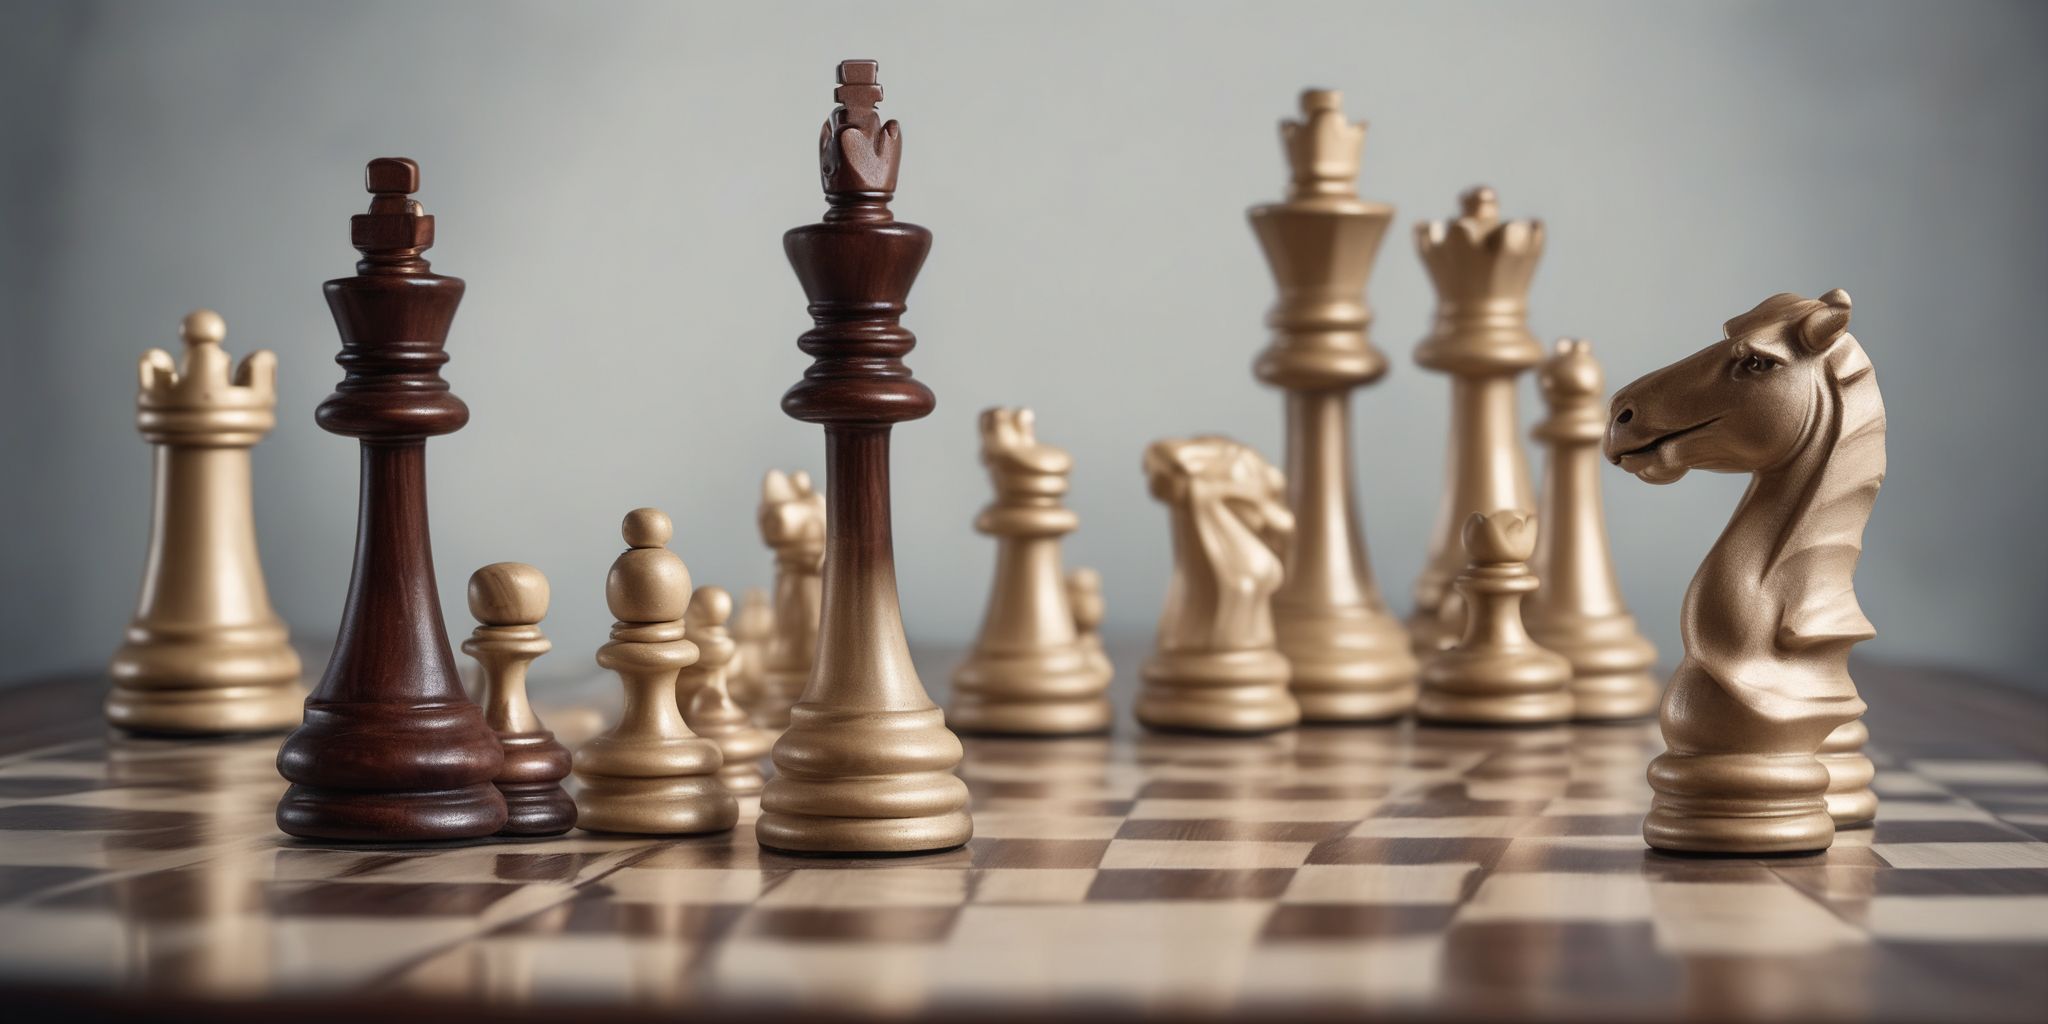 Financial chess  in realistic, photographic style